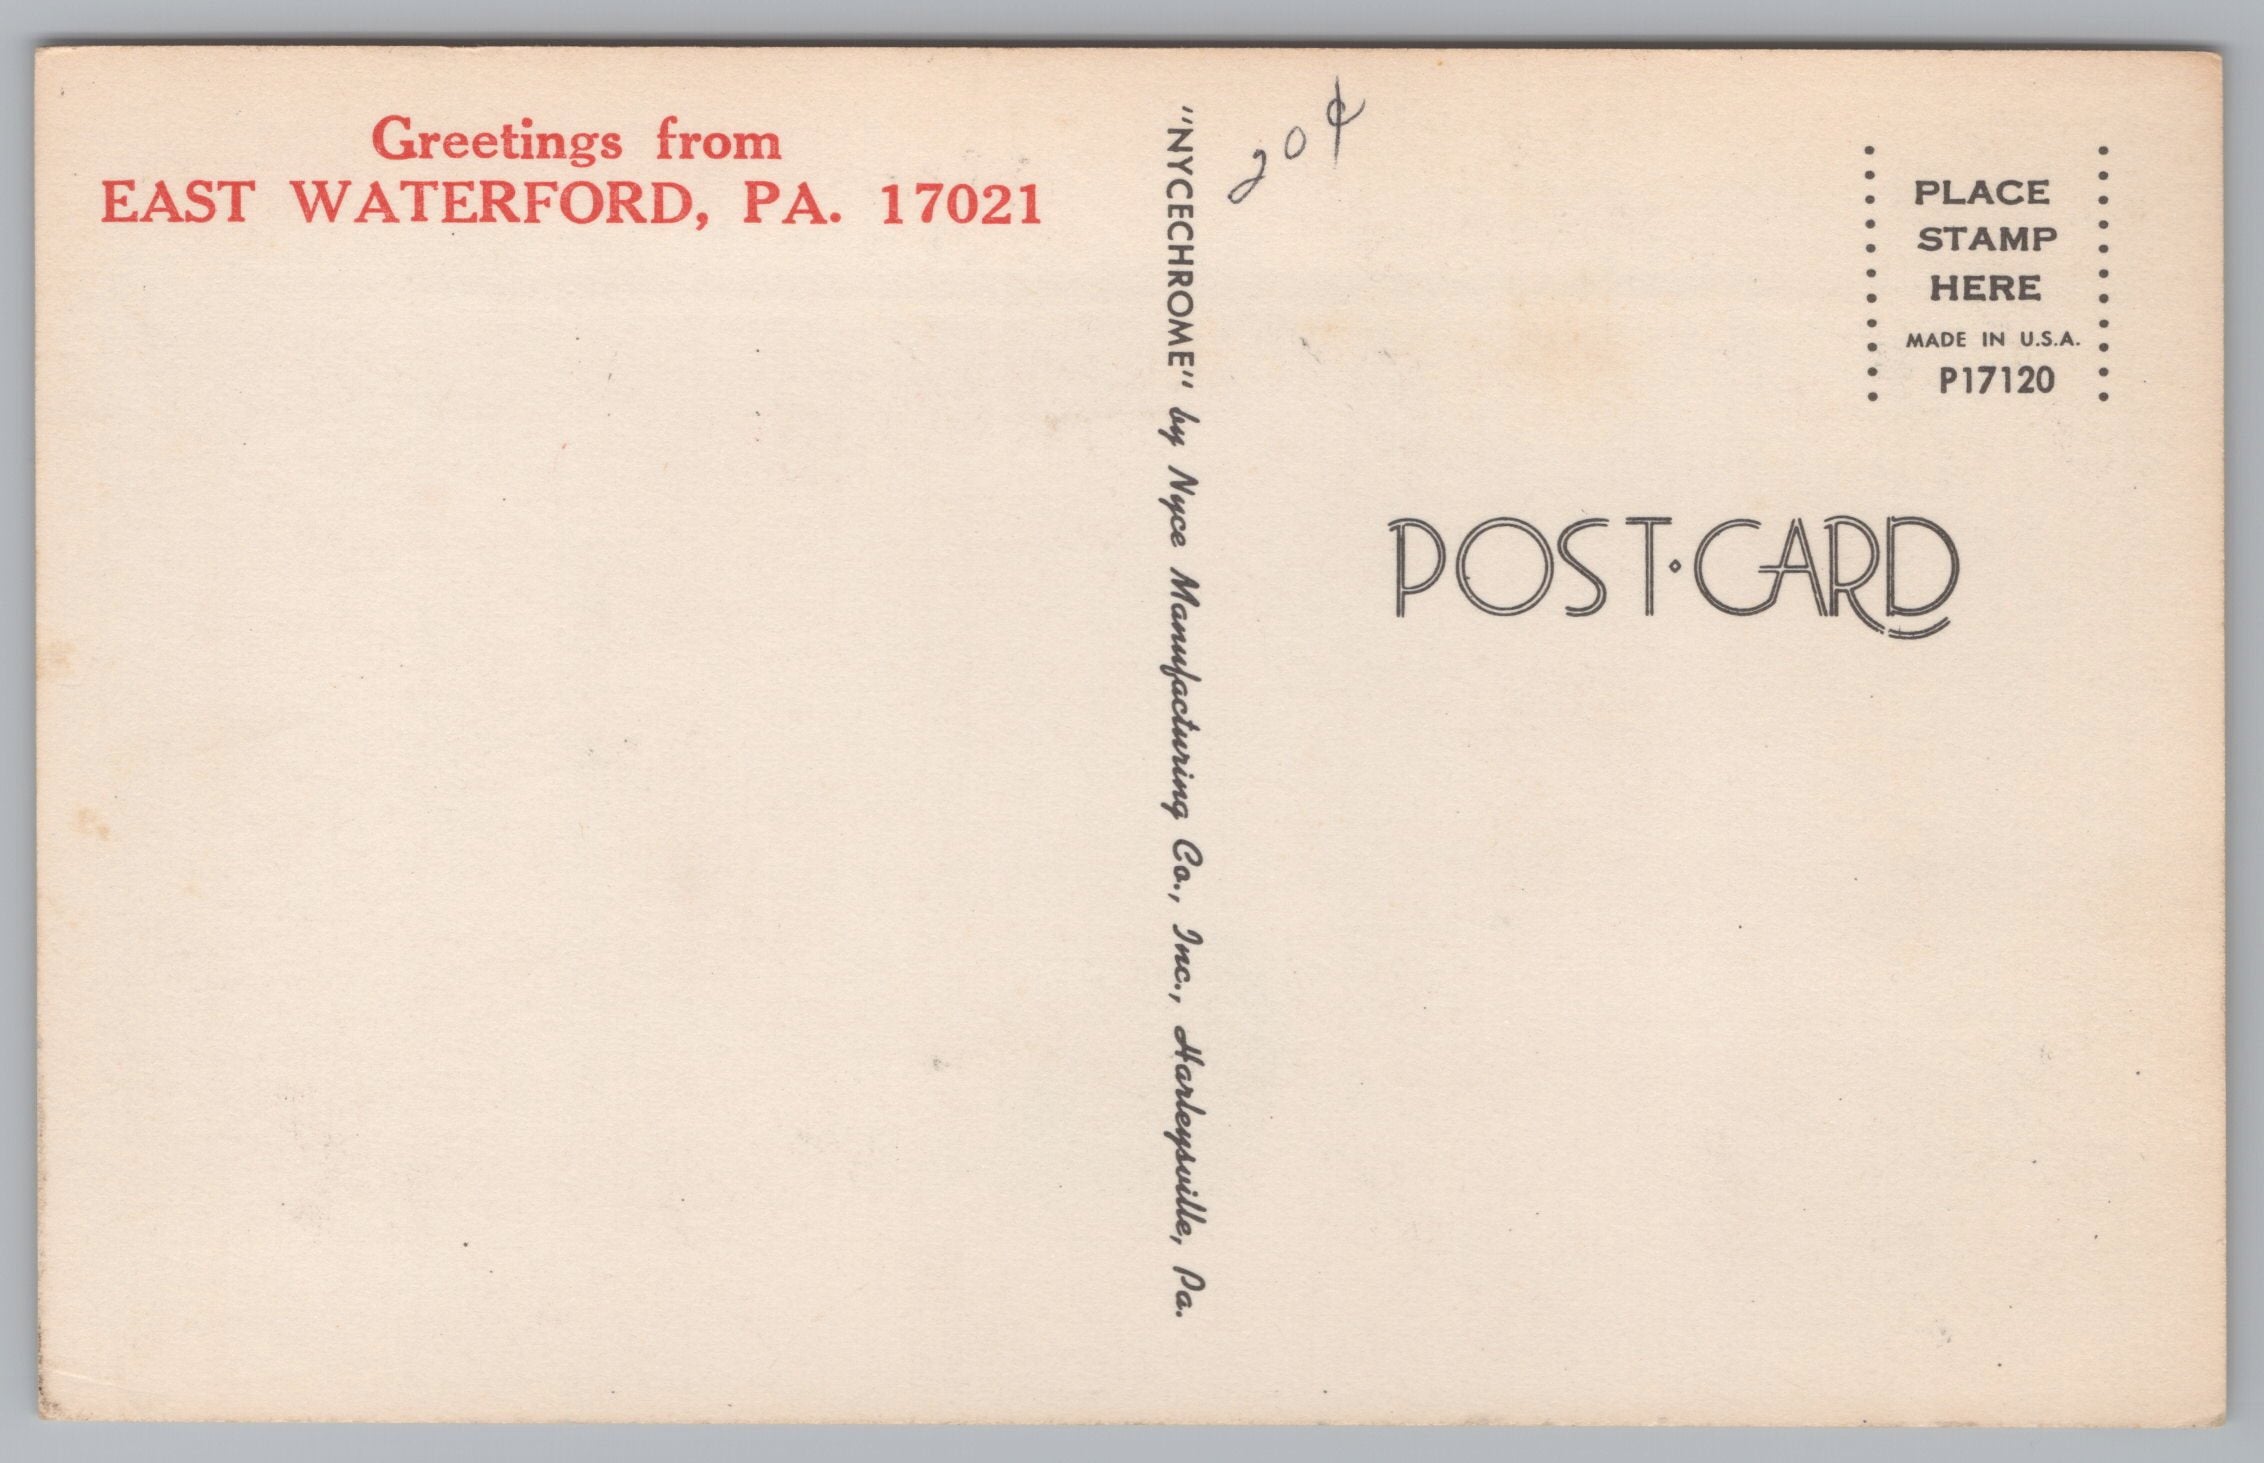 Greeting Card From East Waterford, Pennsylvania, USA, Vintage Post Card.